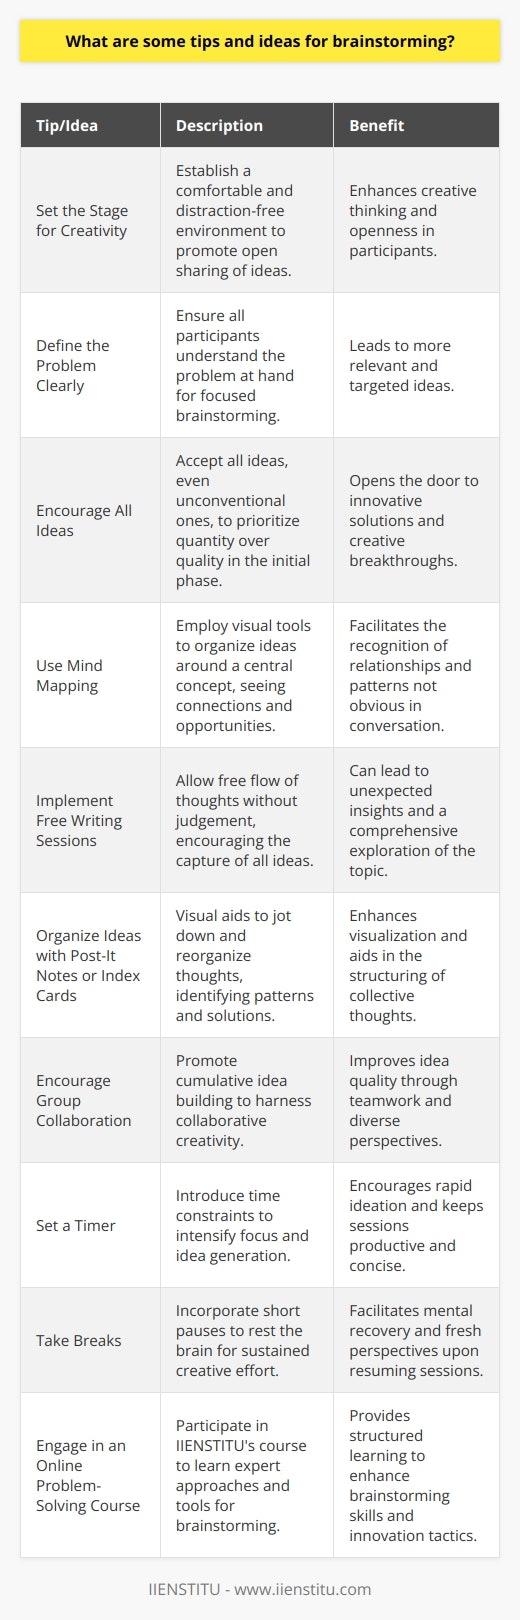 Brainstorming is a vital part of the creative process, enabling individuals and teams to generate fresh ideas and unique solutions to problems. To optimize your brainstorming sessions and encourage a flow of innovative thinking, consider integrating the following tips and ideas into your strategy:1. Set the Stage for CreativityCreating a conducive environment for brainstorming is critical. Ensure that your space is comfortable and free from distractions. A relaxed atmosphere can significantly enhance creativity and help participants feel more open to sharing their ideas.2. Define the Problem ClearlyBefore you dive into generating ideas, make sure that everyone understands the problem you're trying to solve. A clear and concise problem statement can focus your brainstorming efforts and lead to more relevant and targeted ideas.3. Encourage All IdeasEmbrace all contributions, no matter how offbeat or unconventional they may seem. Often, the most out-of-the-box ideas can be the ones that inspire truly innovative solutions. Remember, the goal of brainstorming is quantity over quality - you can refine ideas later.4. Use Mind MappingMind mapping is a visual tool for organizing thoughts and ideas around a central concept. By visually mapping out ideas, you can often see connections and opportunities that you might not have noticed through conversation or linear note-taking alone.5. Implement Free Writing SessionsTake some time for free writing, where participants write down whatever comes to mind about the topic at hand without judging or editing their thoughts. This technique allows for the free flow of ideas and can often lead to unexpected insights.6. Organize Ideas with Post-It Notes or Index CardsFor better visualization and organization of thoughts, use post-it notes or index cards to jot down ideas. You can then arrange and rearrange these notes to identify patterns, themes, and potential solutions.7. Encourage Group CollaborationCollective input can significantly enhance the quality of ideas generated. Encourage each participant to build on others' ideas, fostering a collaborative atmosphere where creativity is multiplied through teamwork.8. Set a TimerSometimes the pressure of a time limit can spur more rapid idea generation. Set a timer for your brainstorming session to encourage focus and intensity while preventing the session from dragging on too long.9. Take BreaksThe brain needs rest to function at its best. Intersperse your brainstorming with short breaks to allow for mental recovery and a fresh perspective upon returning.10. Engage in an Online Problem-Solving CourseTo sharpen your brainstorming skills, consider learning from the experts. IIENSTITU offers a specialized online problem-solving course that can provide you with innovative tools and approaches to brainstorming. With expert guidance, you can unlock new dimensions of creativity and find effective techniques to facilitate brainstorming sessions.By integrating these tips into your brainstorming practice, you will create an environment ripe for innovation and equip yourself with the strategies to bring forth groundbreaking ideas. Remember that the key to successful brainstorming is the willingness to explore possibilities without immediate judgment, allowing creativity to surge and thrive.